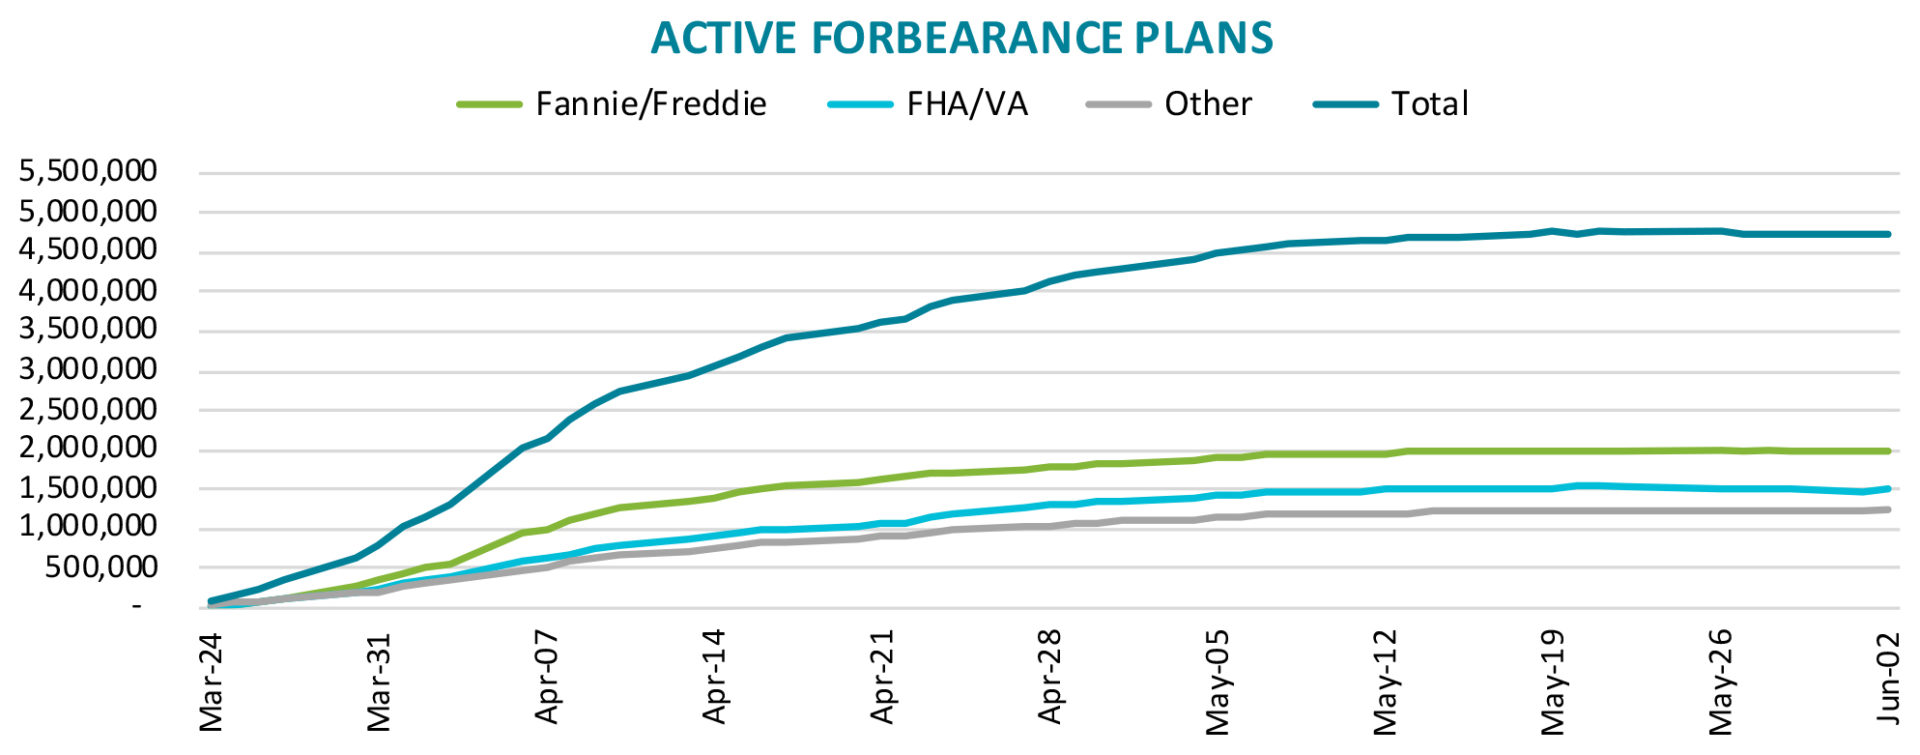 Black Knight’s latest McDash Flash Forbearance Tracker finds that active forbearance volumes decreased by nearly 34,000 over the past week